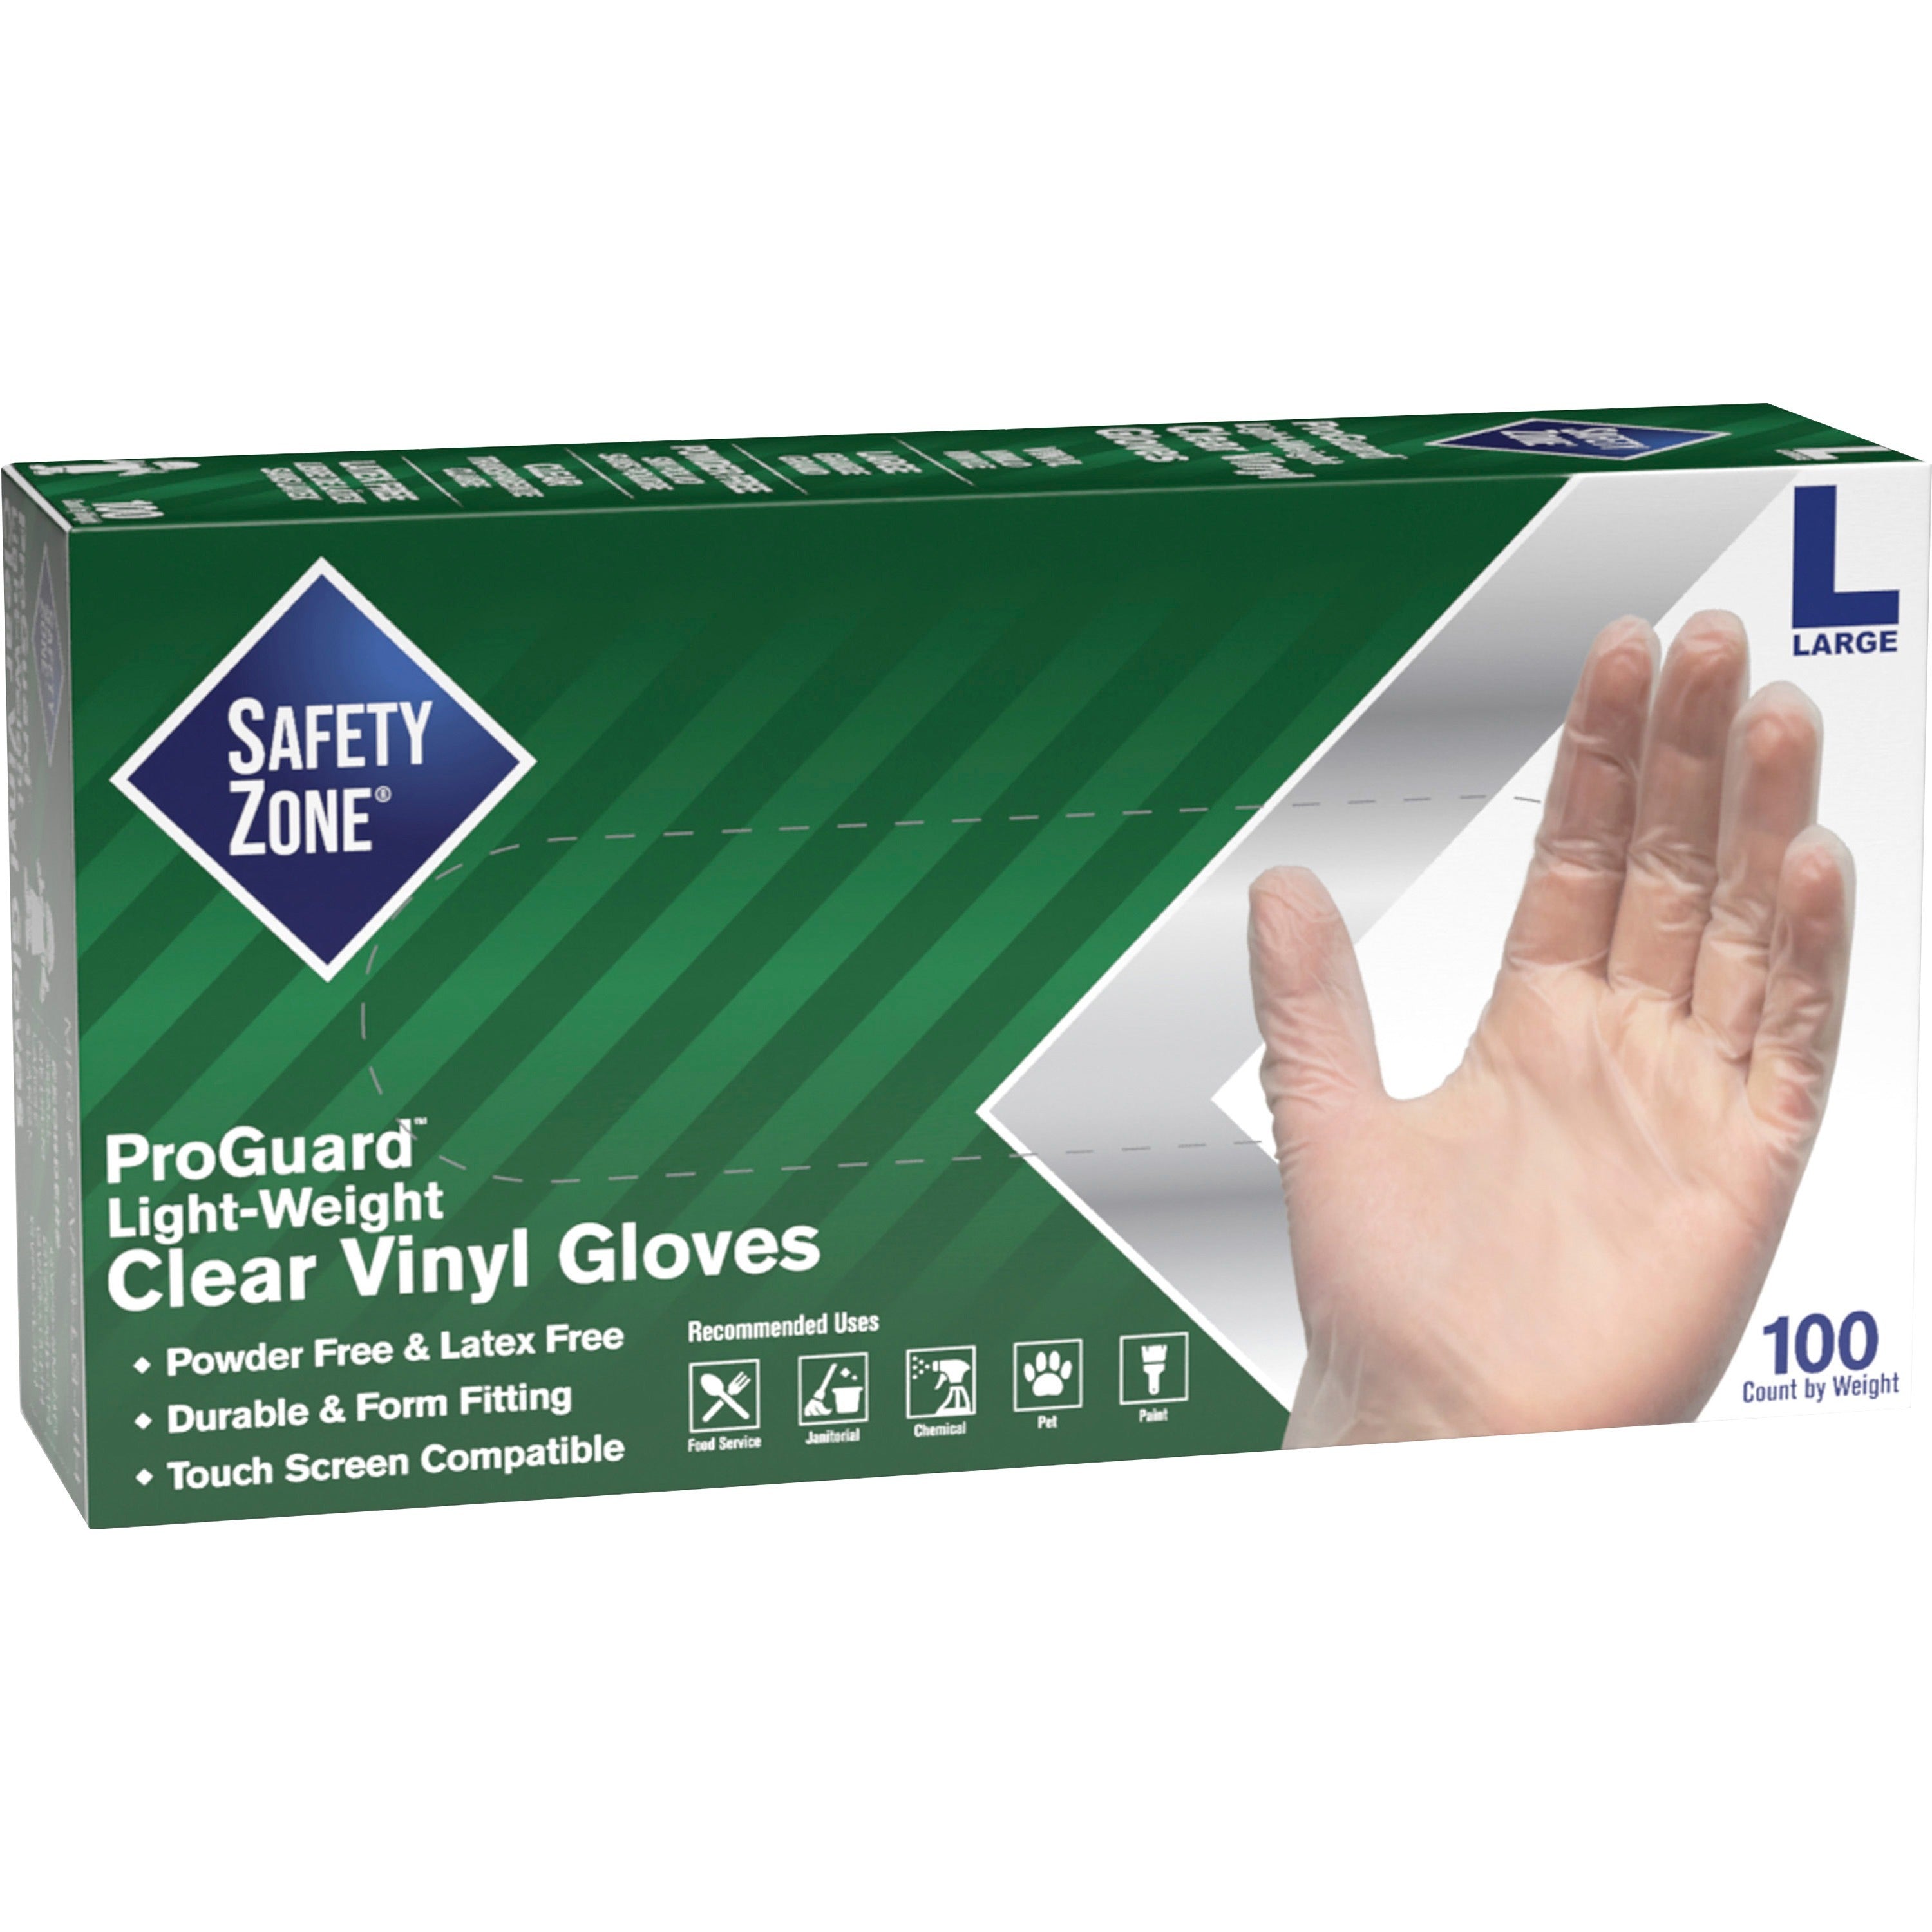 Safety Zone Powder Free Clear Vinyl Gloves - Large Size - Clear - Latex-free, DEHP-free, DINP-free, PFAS-free - For Food Preparation, Cleaning - 1000 / Carton - 9.25" Glove Length